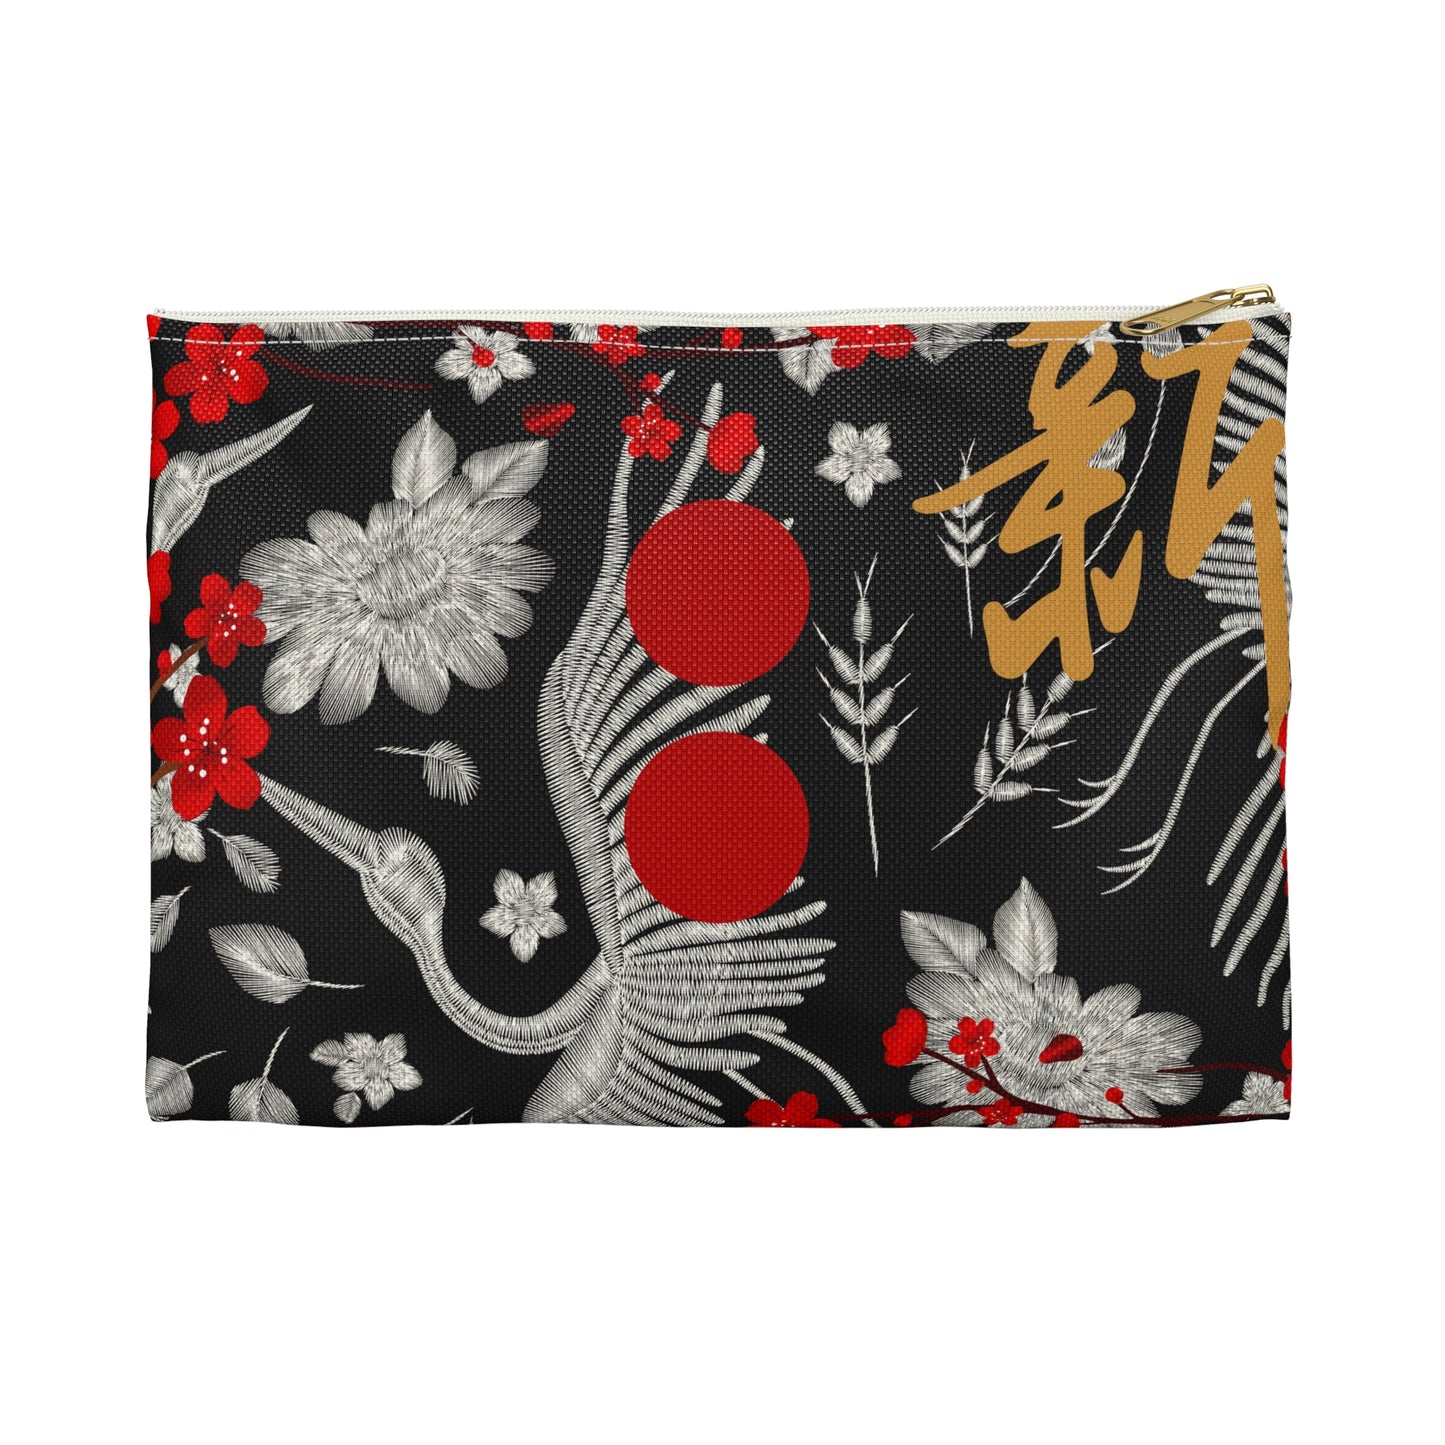 CHERRY BLOSSOMS Accessory Pouch: Toiletries Bag, On-the-go Items, Everyday Bag